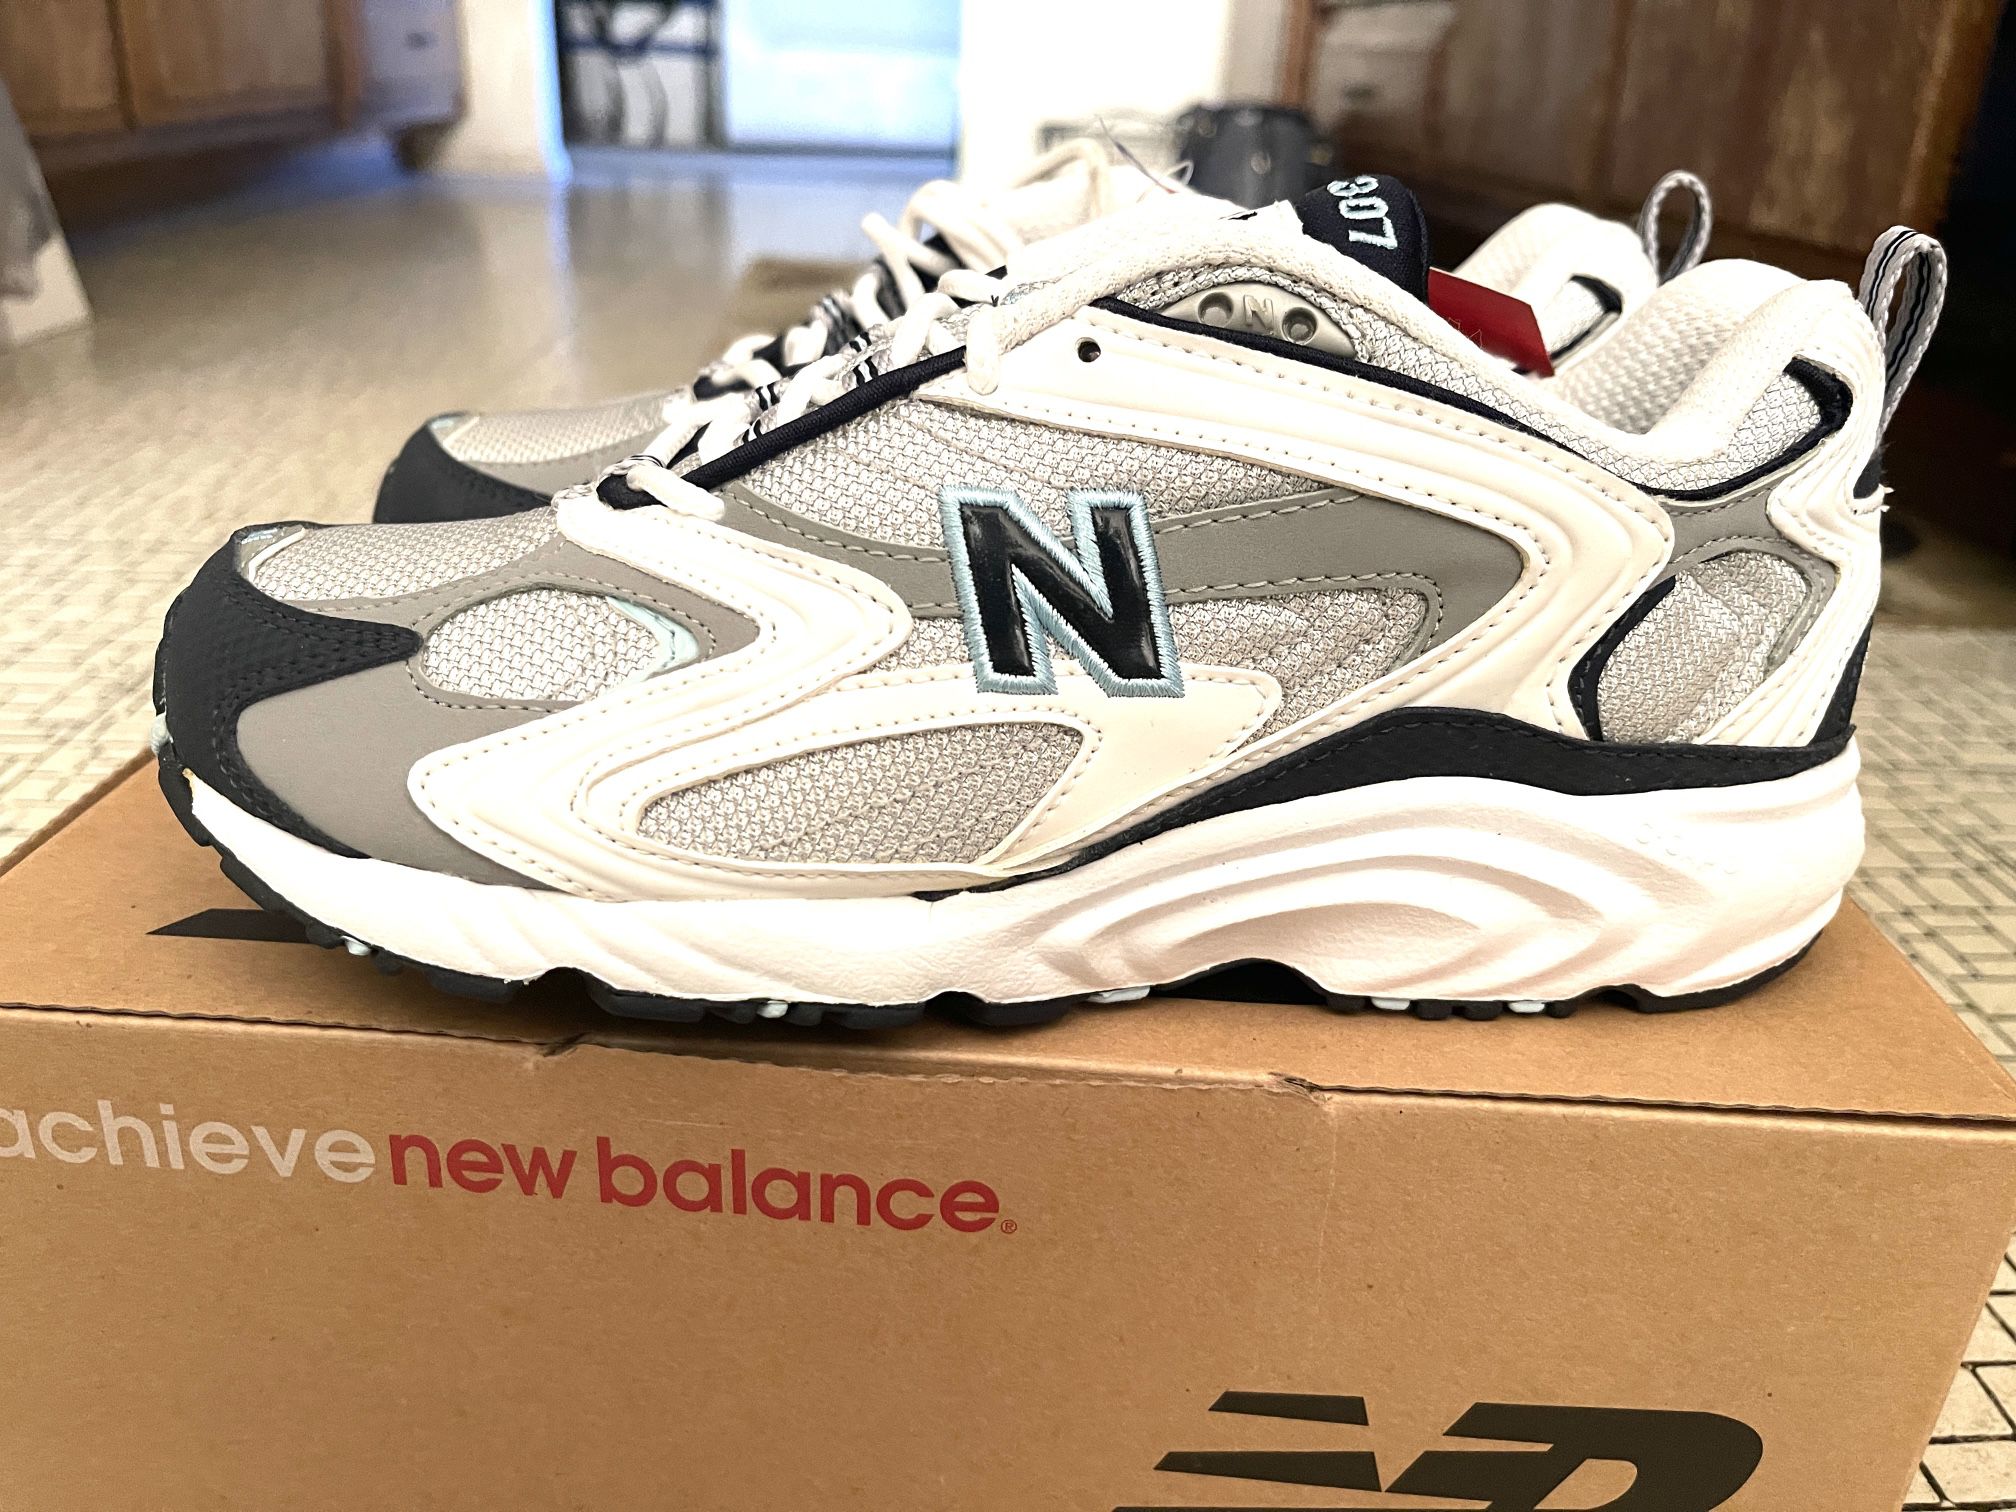 New Balance 307 Shoes Woman’s Size 7 for Sale in San Diego, CA - OfferUp